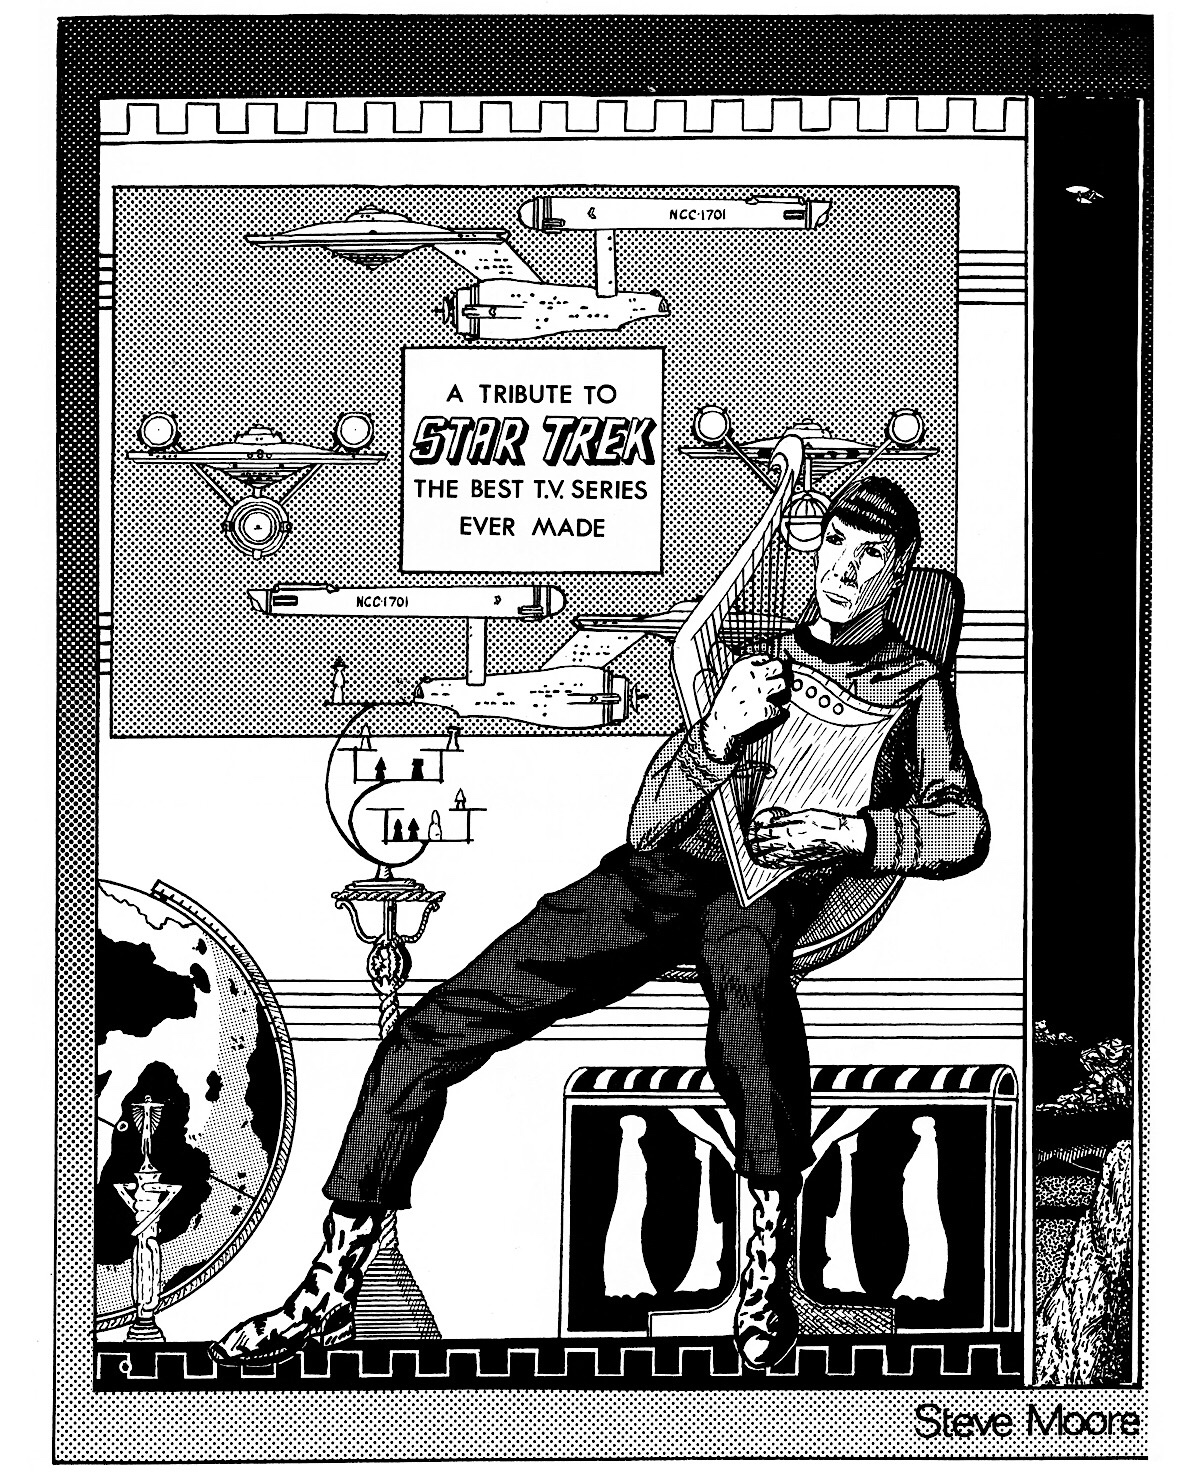 A tribute to Star Trek’s Mr Spock by Steve Moore, better known of course, as a prolific and fondly remembered comics writer